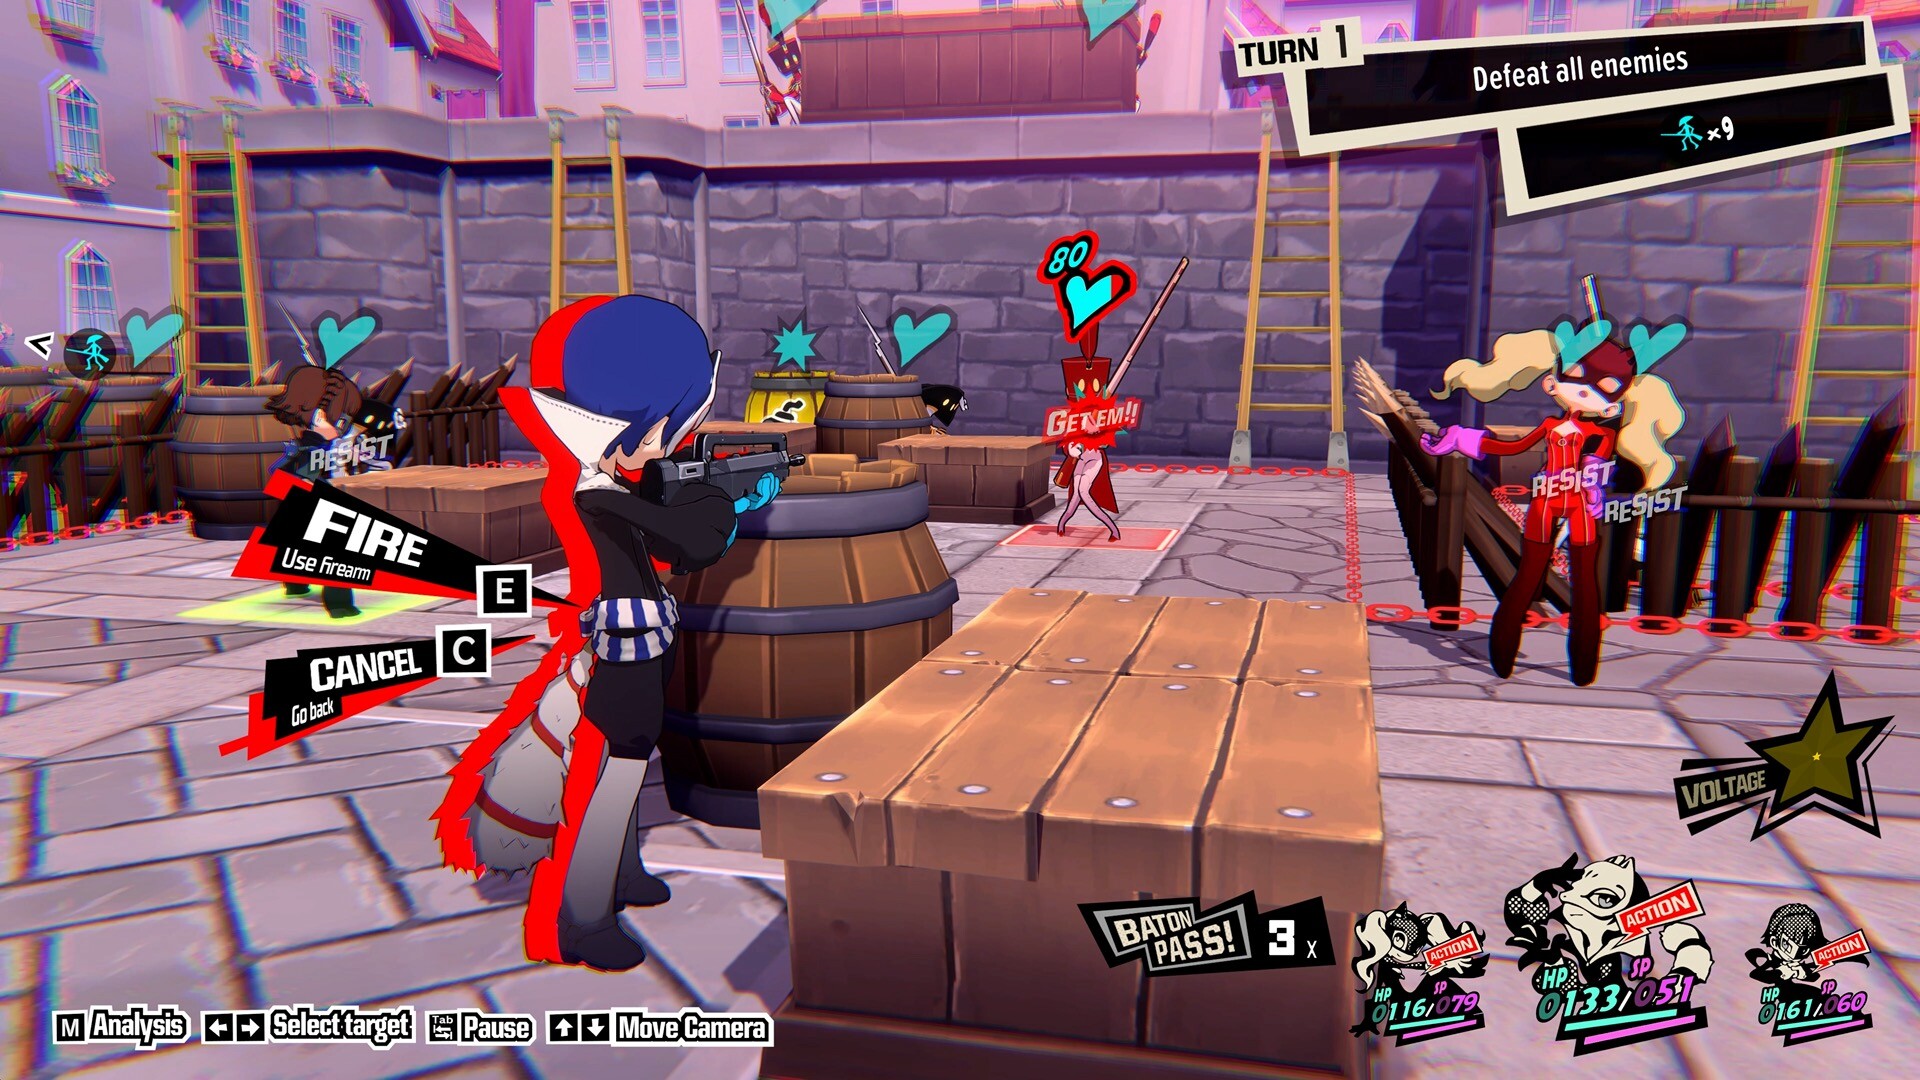 Persona 5 Royal - Xbox One Gameplay + FPS Test 